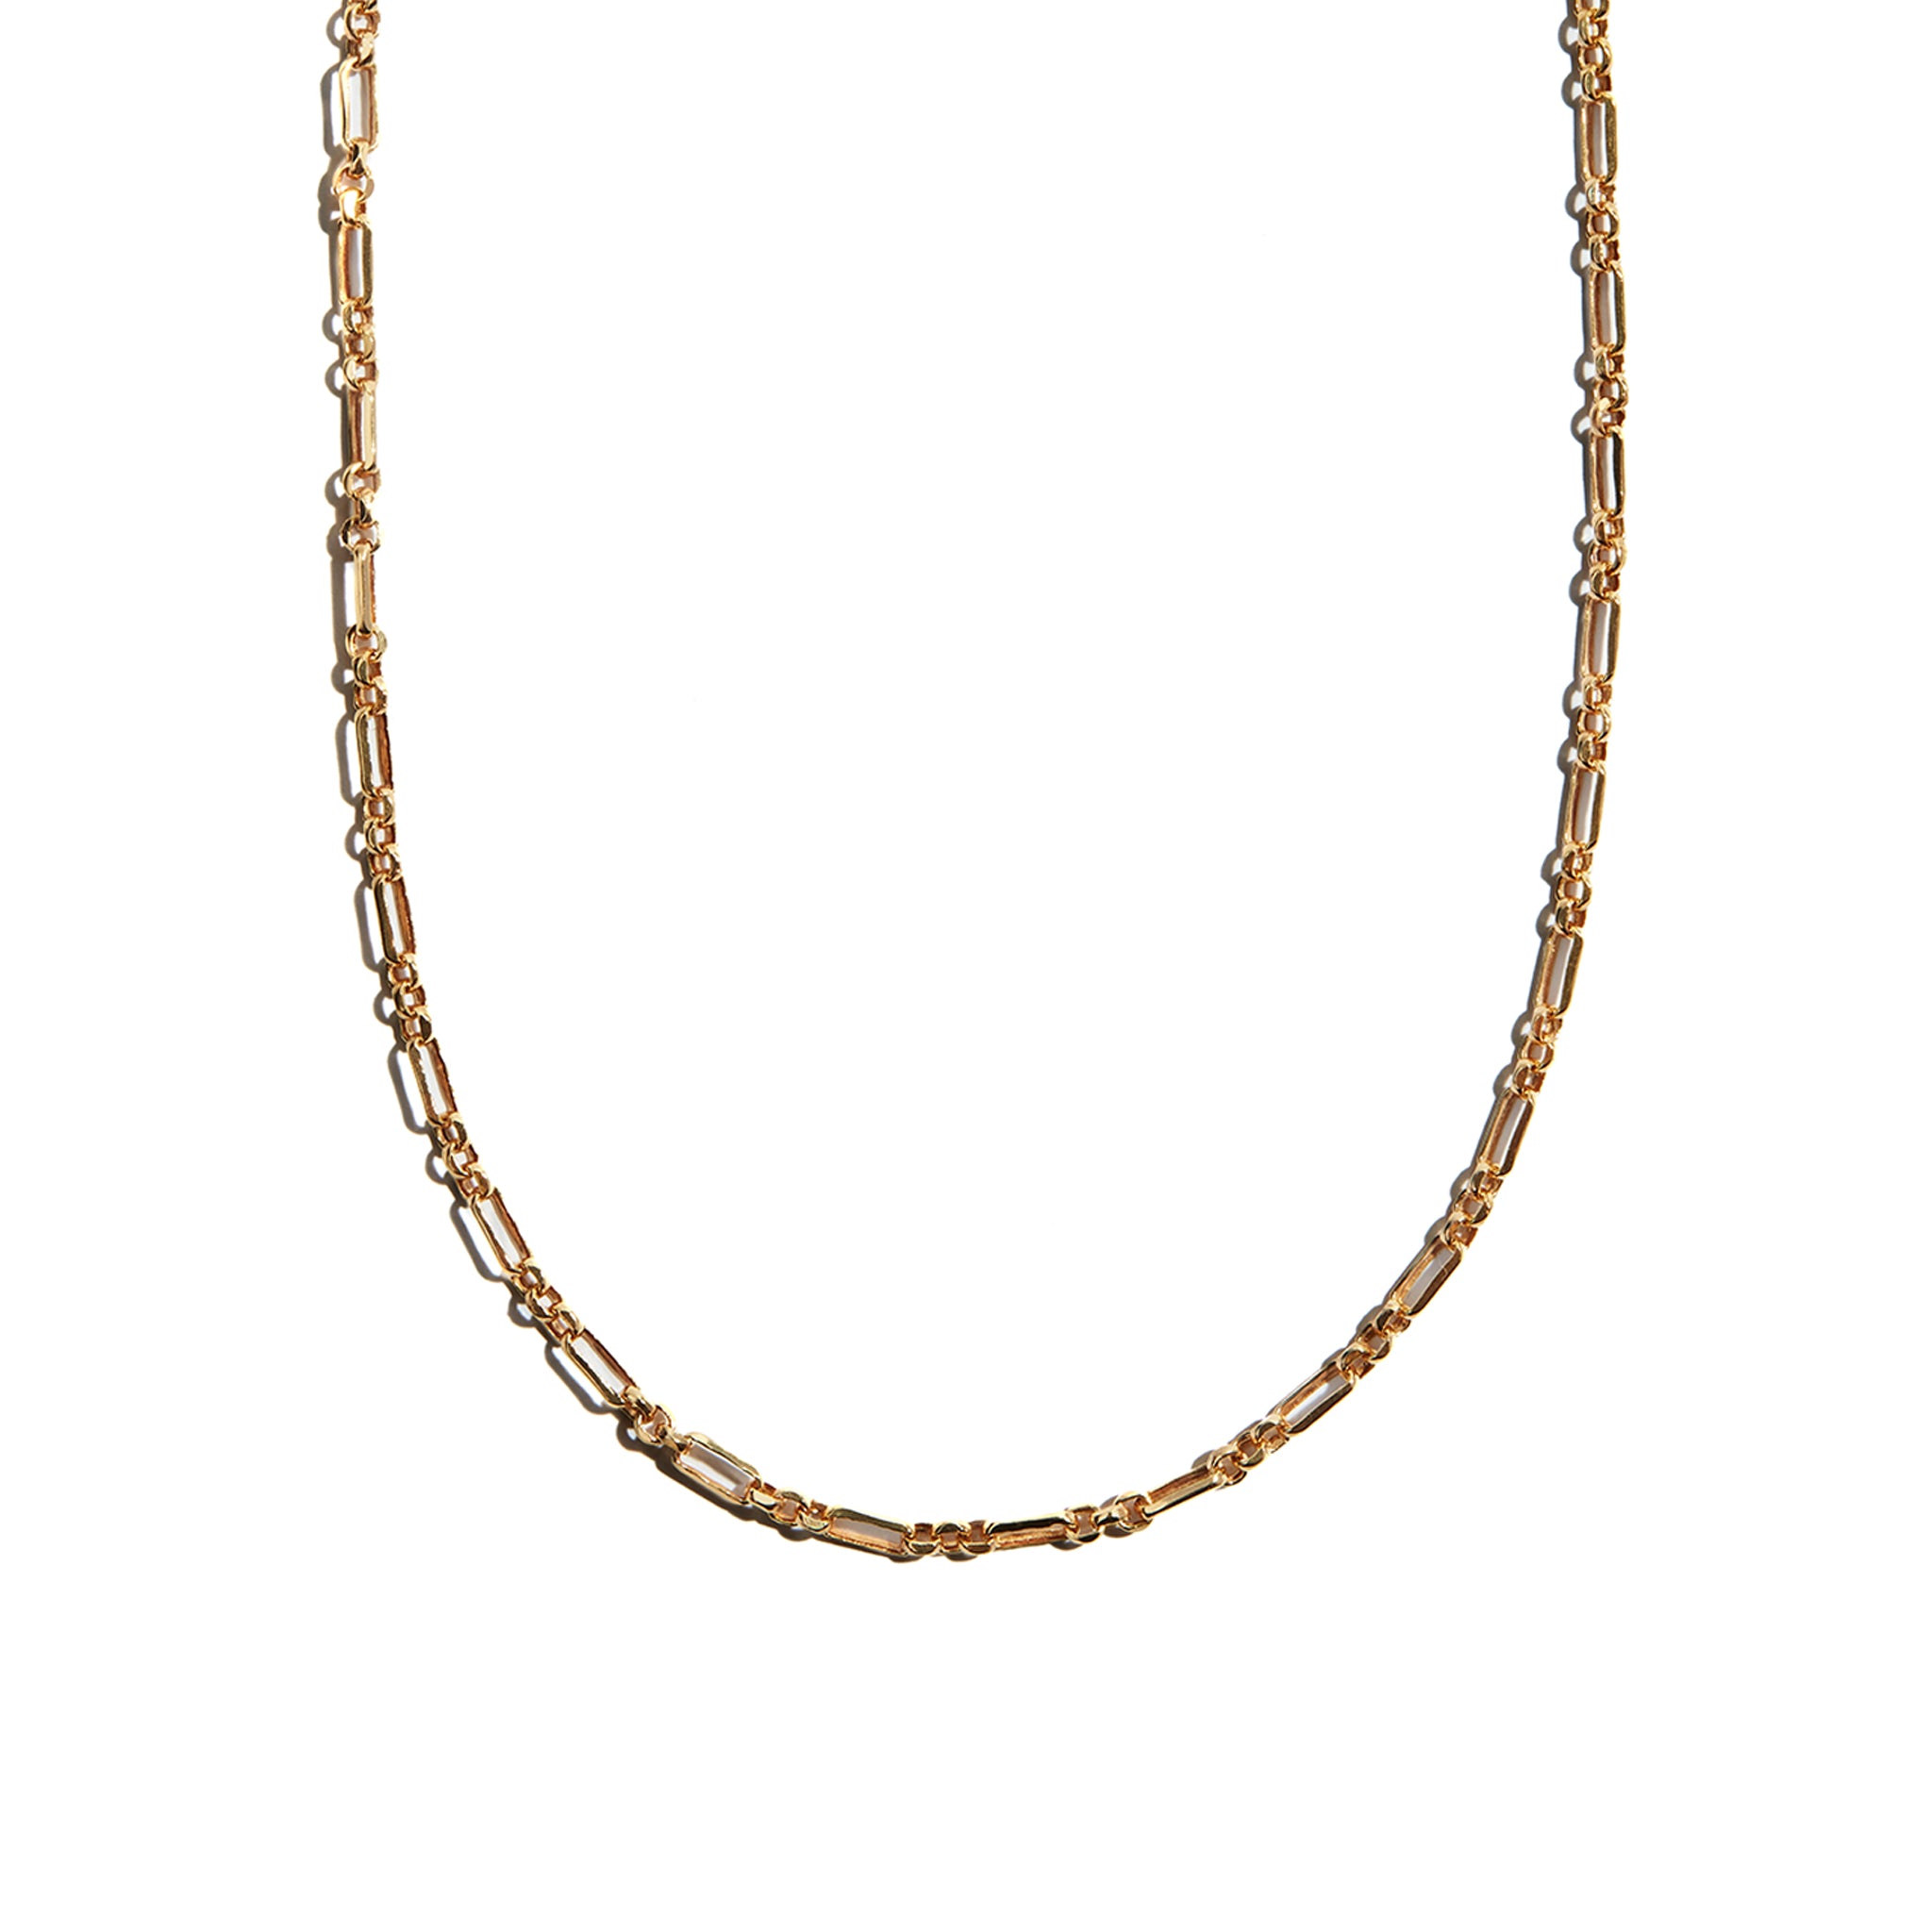 Elevate your ensemble with the 9 carat gold Antique Style Chain. This classic accessoryis perfect for adding a touch of sophistication and elegance to any outfit.